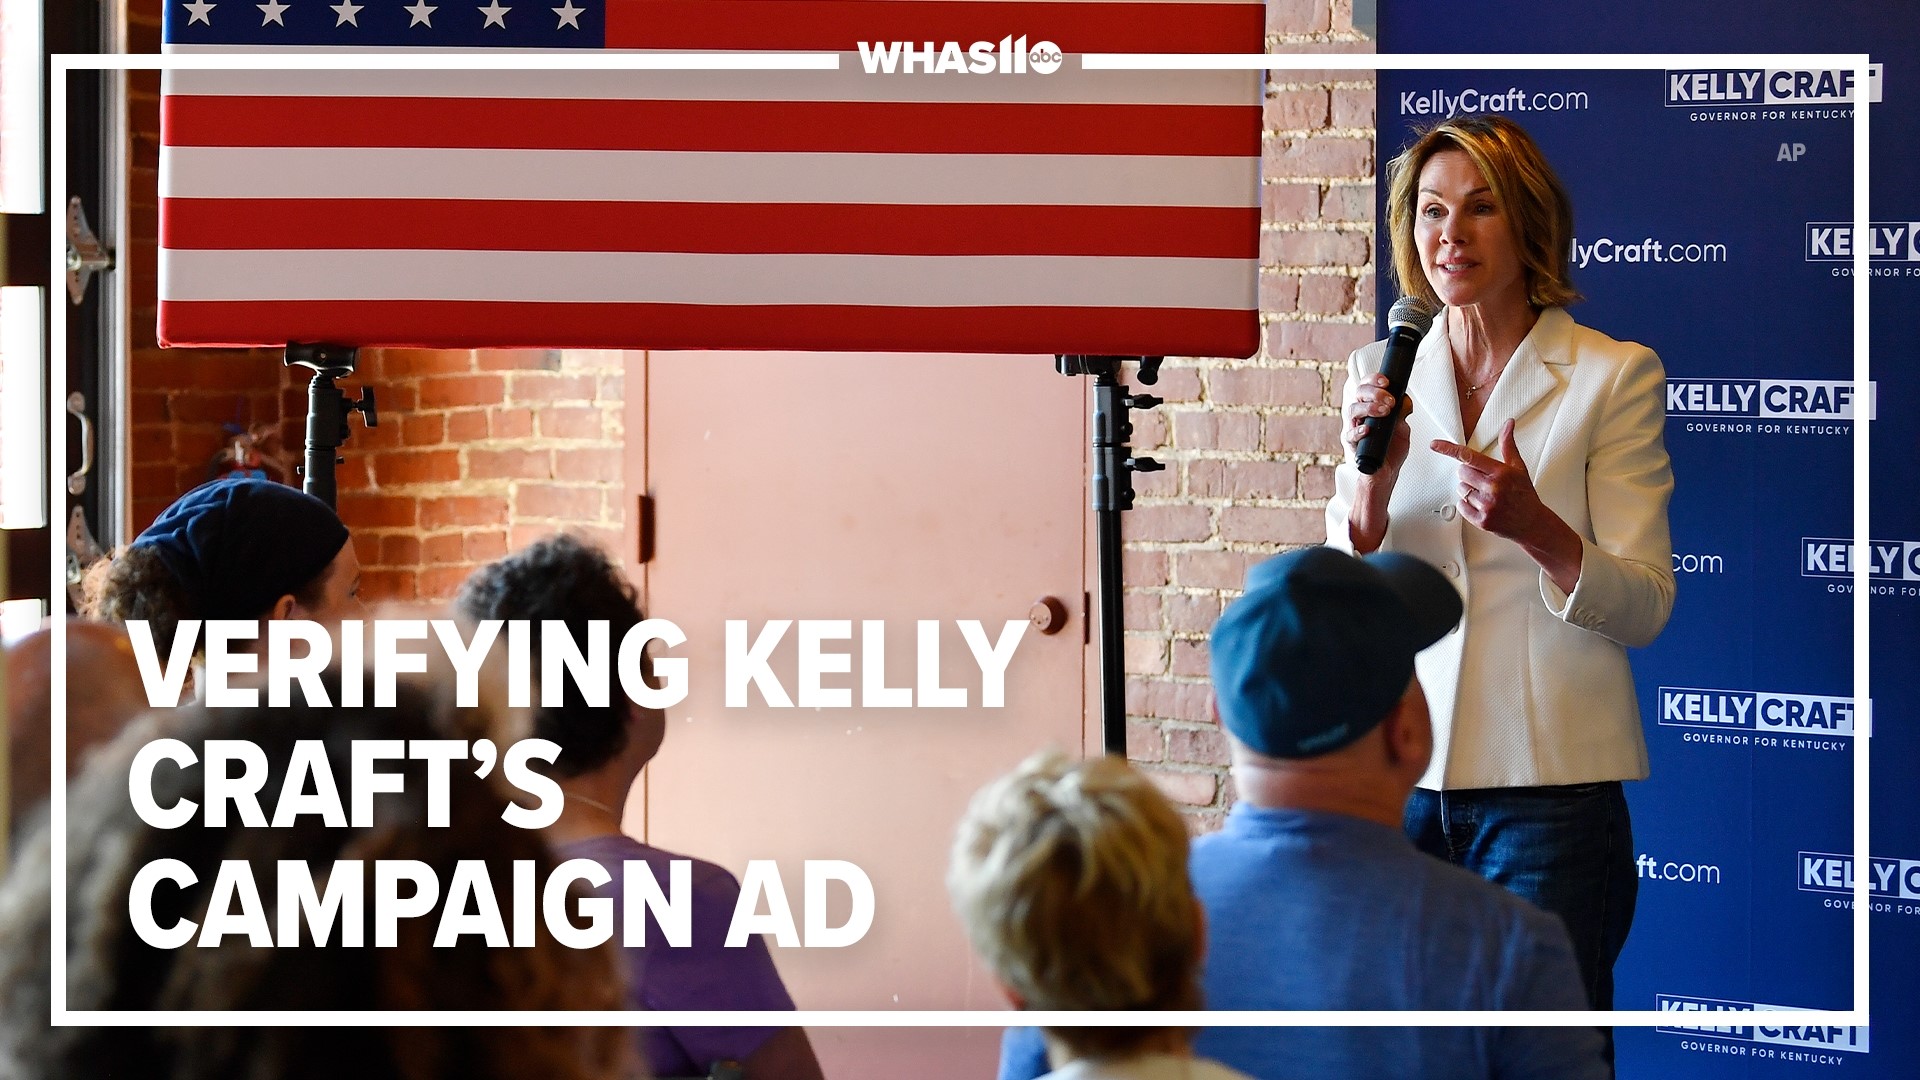 GOP governor candidate Kelly Craft takes direct aim at the Kentucky Department of Education and what she views as a harmful influence on what kids are learning.